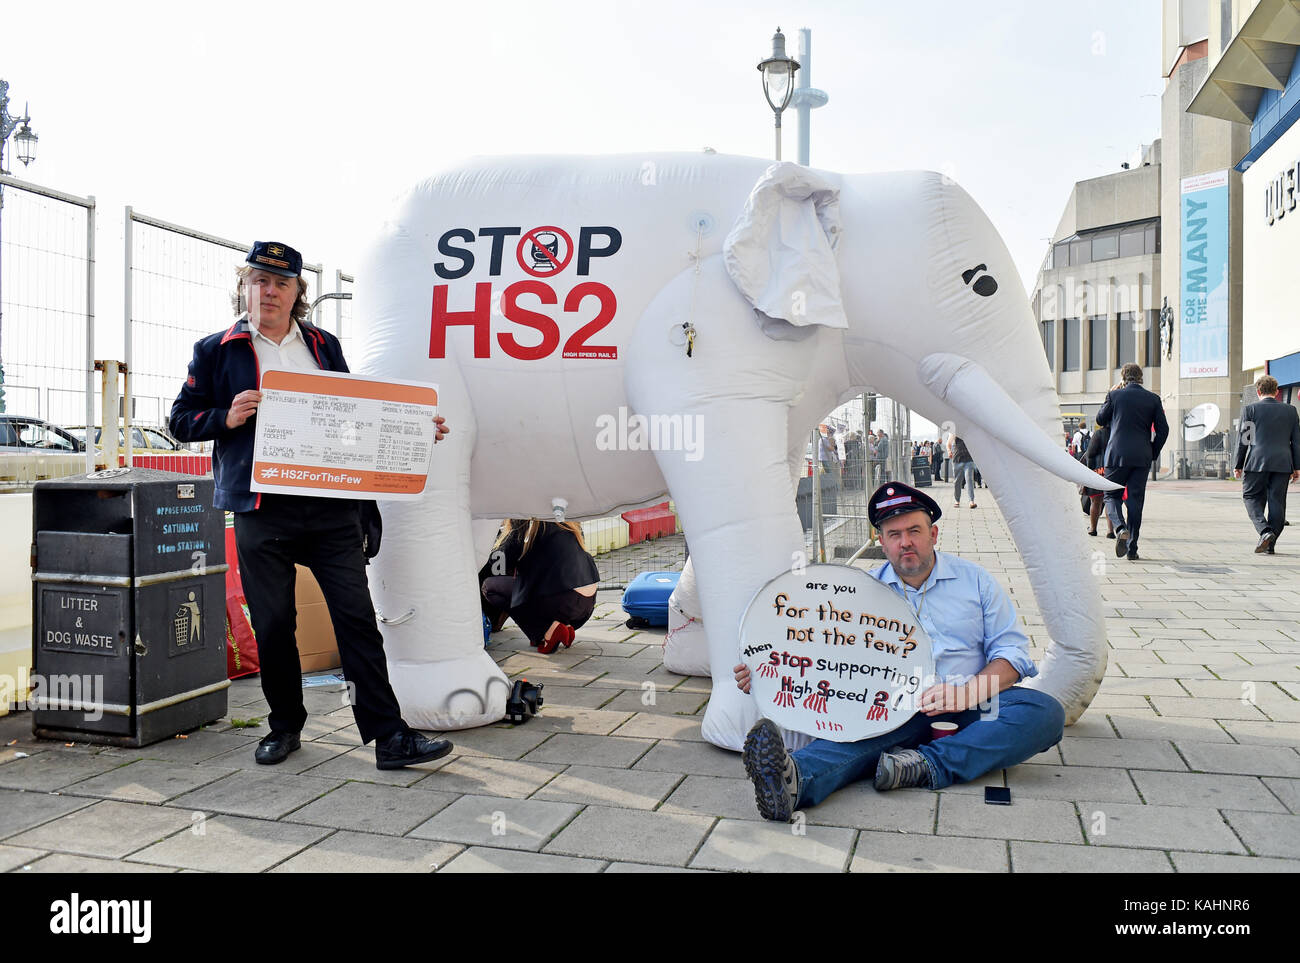 Brighton, UK. 26th Sep, 2017. Stop the HS2 (High Speed 2) campaigners outside the Labour Party Conference in Brighton today Credit: Simon Dack/Alamy Live News Stock Photo